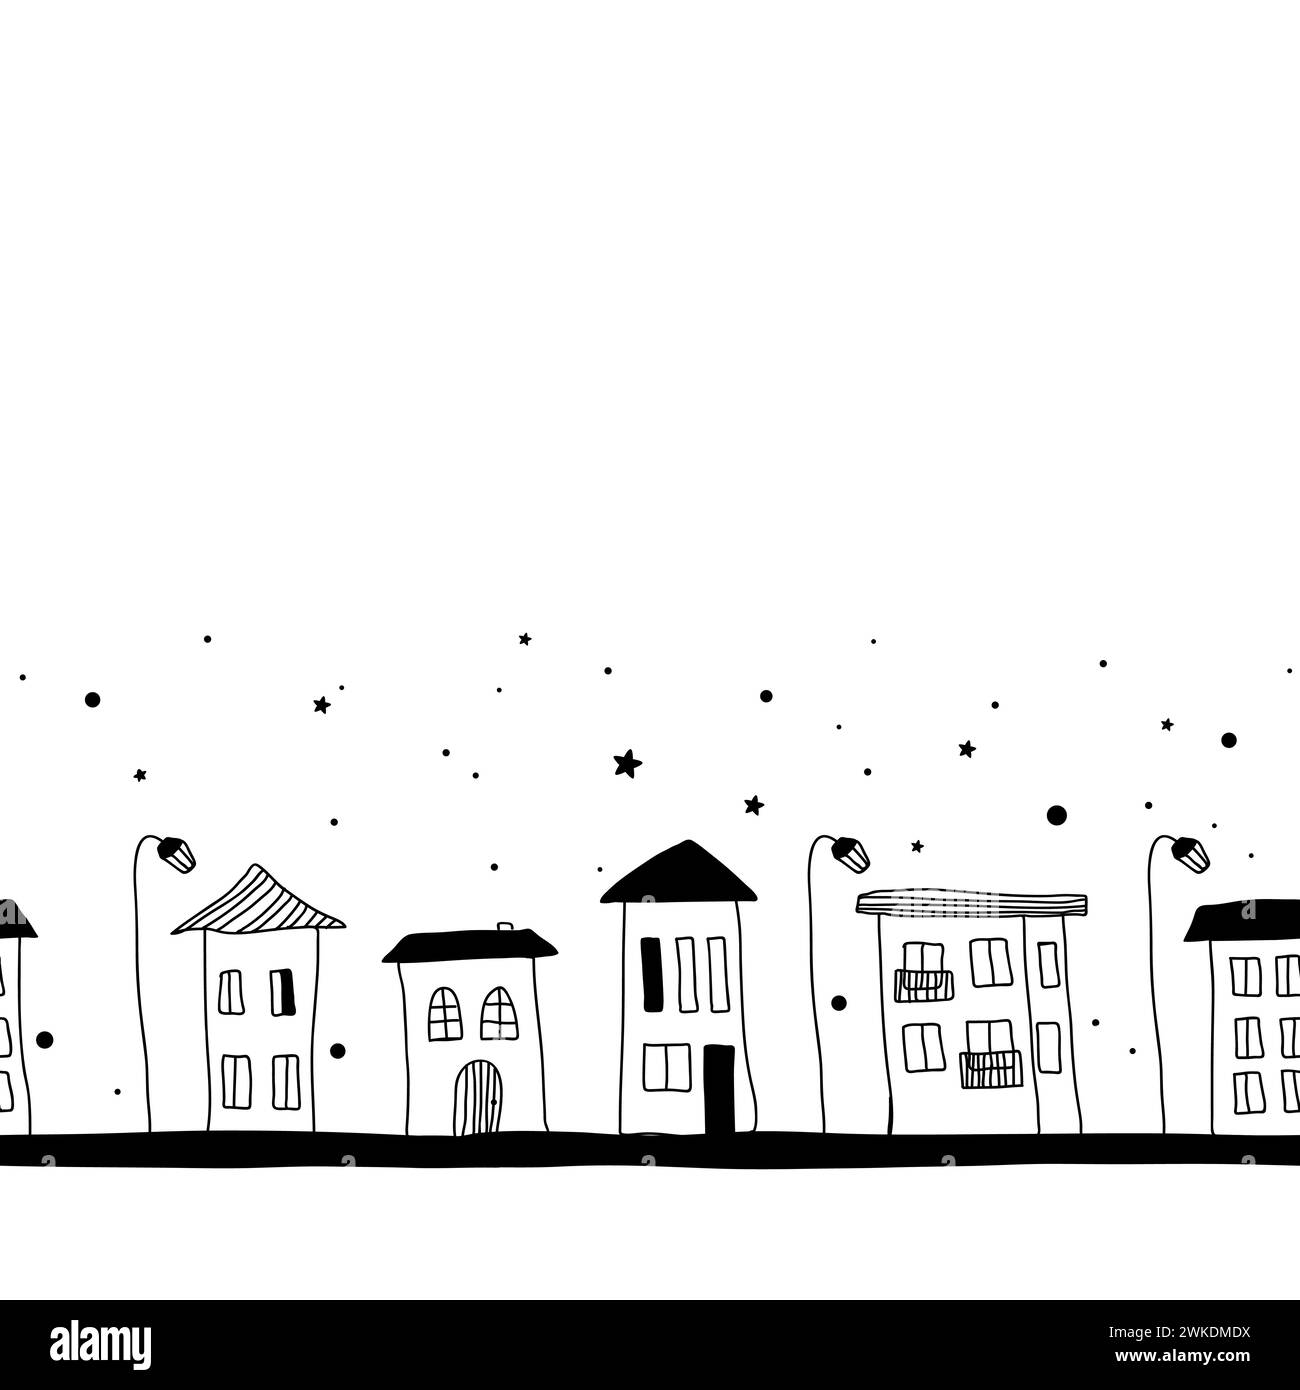 Doodle hand drawn houses, outline seamless border. City streets. Great for fabric, textile, vector illustration. Stock Vector